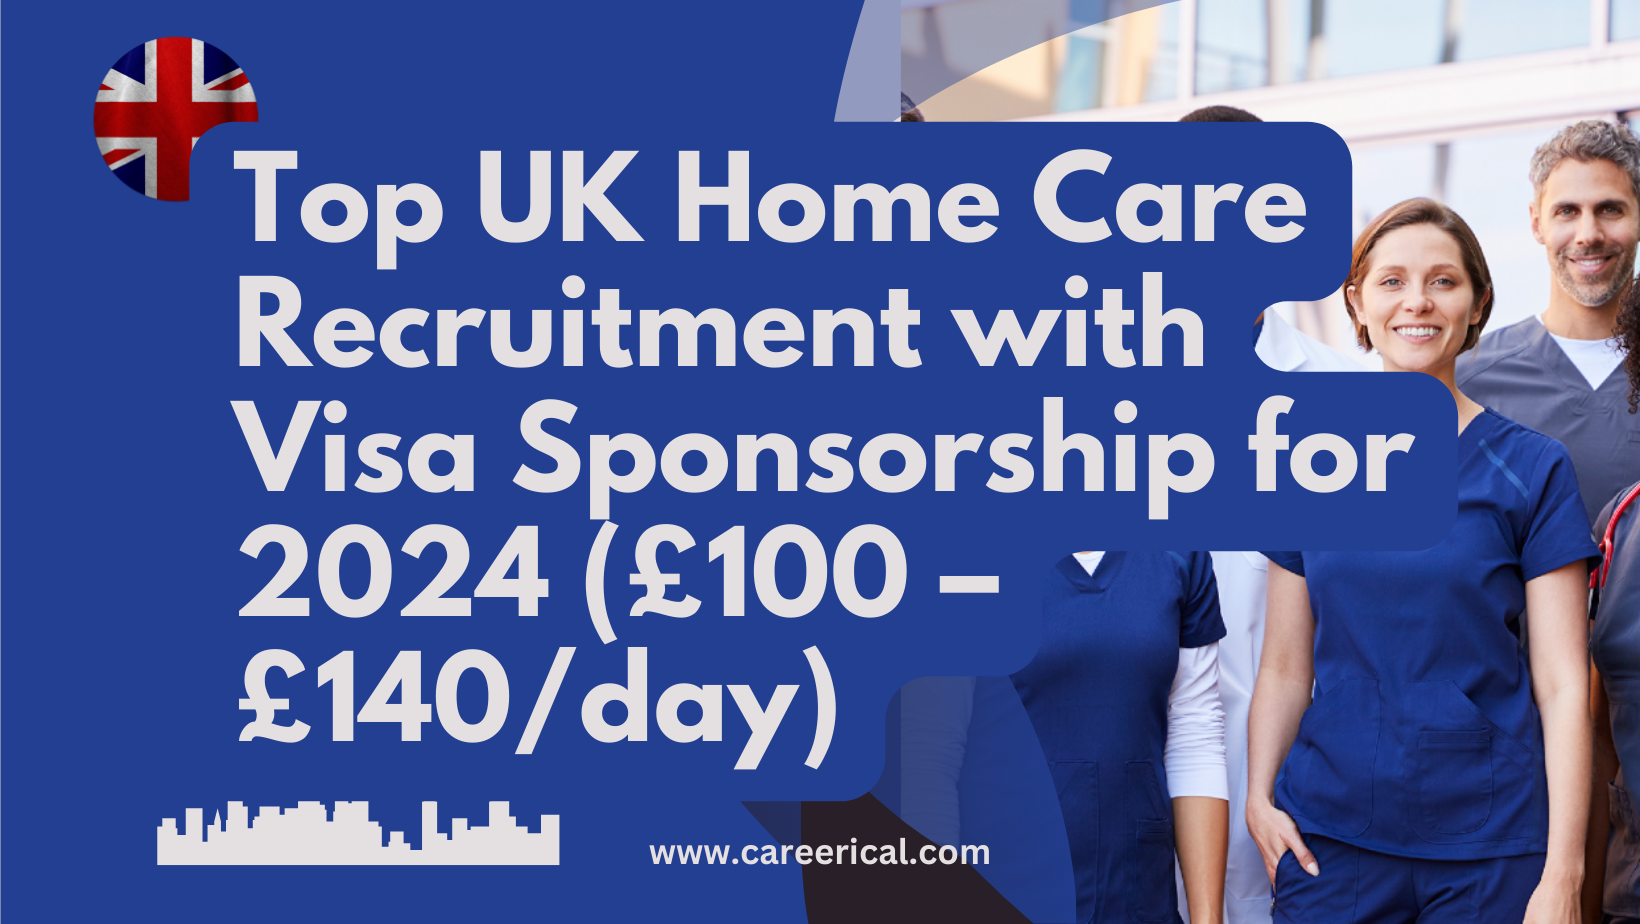 Top UK Home Care Recruitment With Visa Sponsorship For 2024 